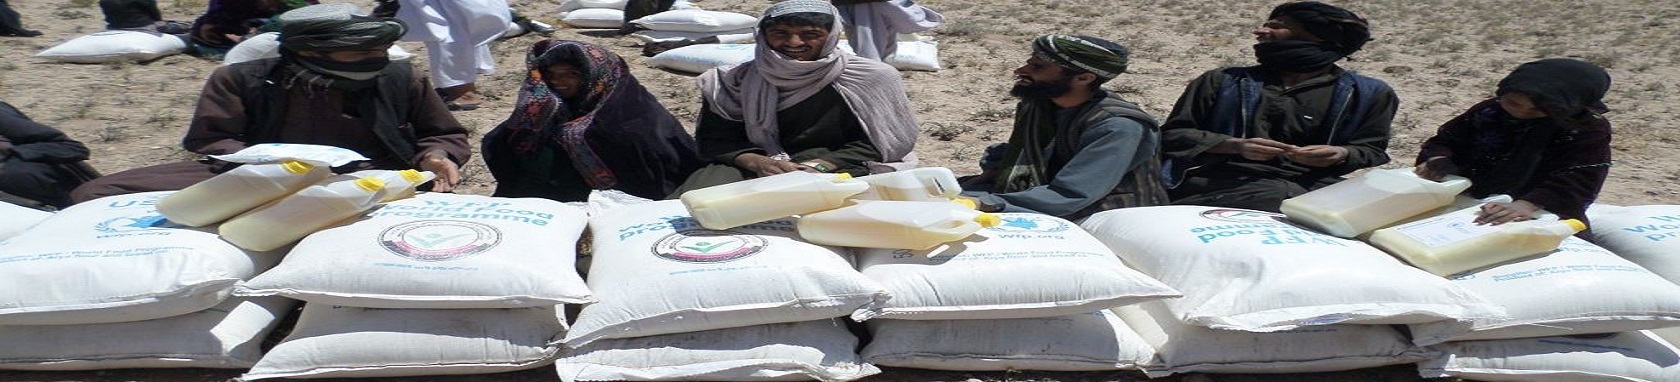 Food distribution for 60 conflicted affected vulnerable families